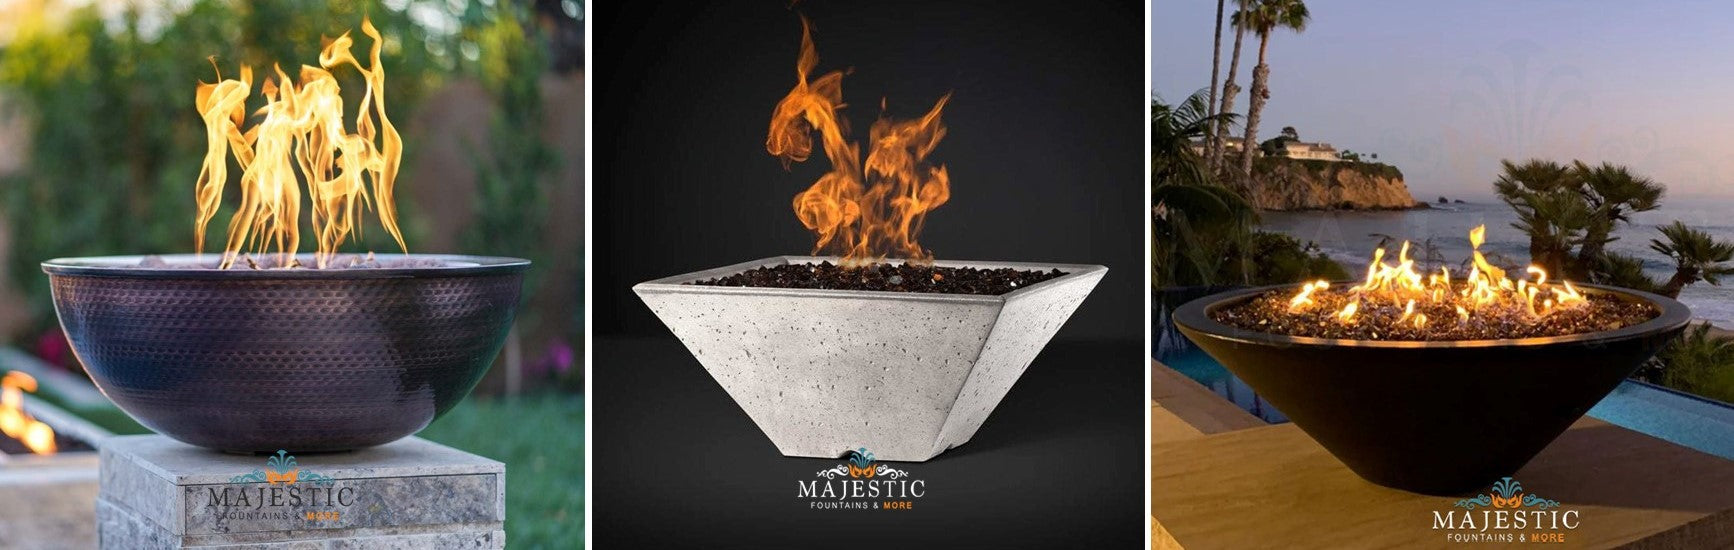 Fire Bowls - Majestic Fountains and More